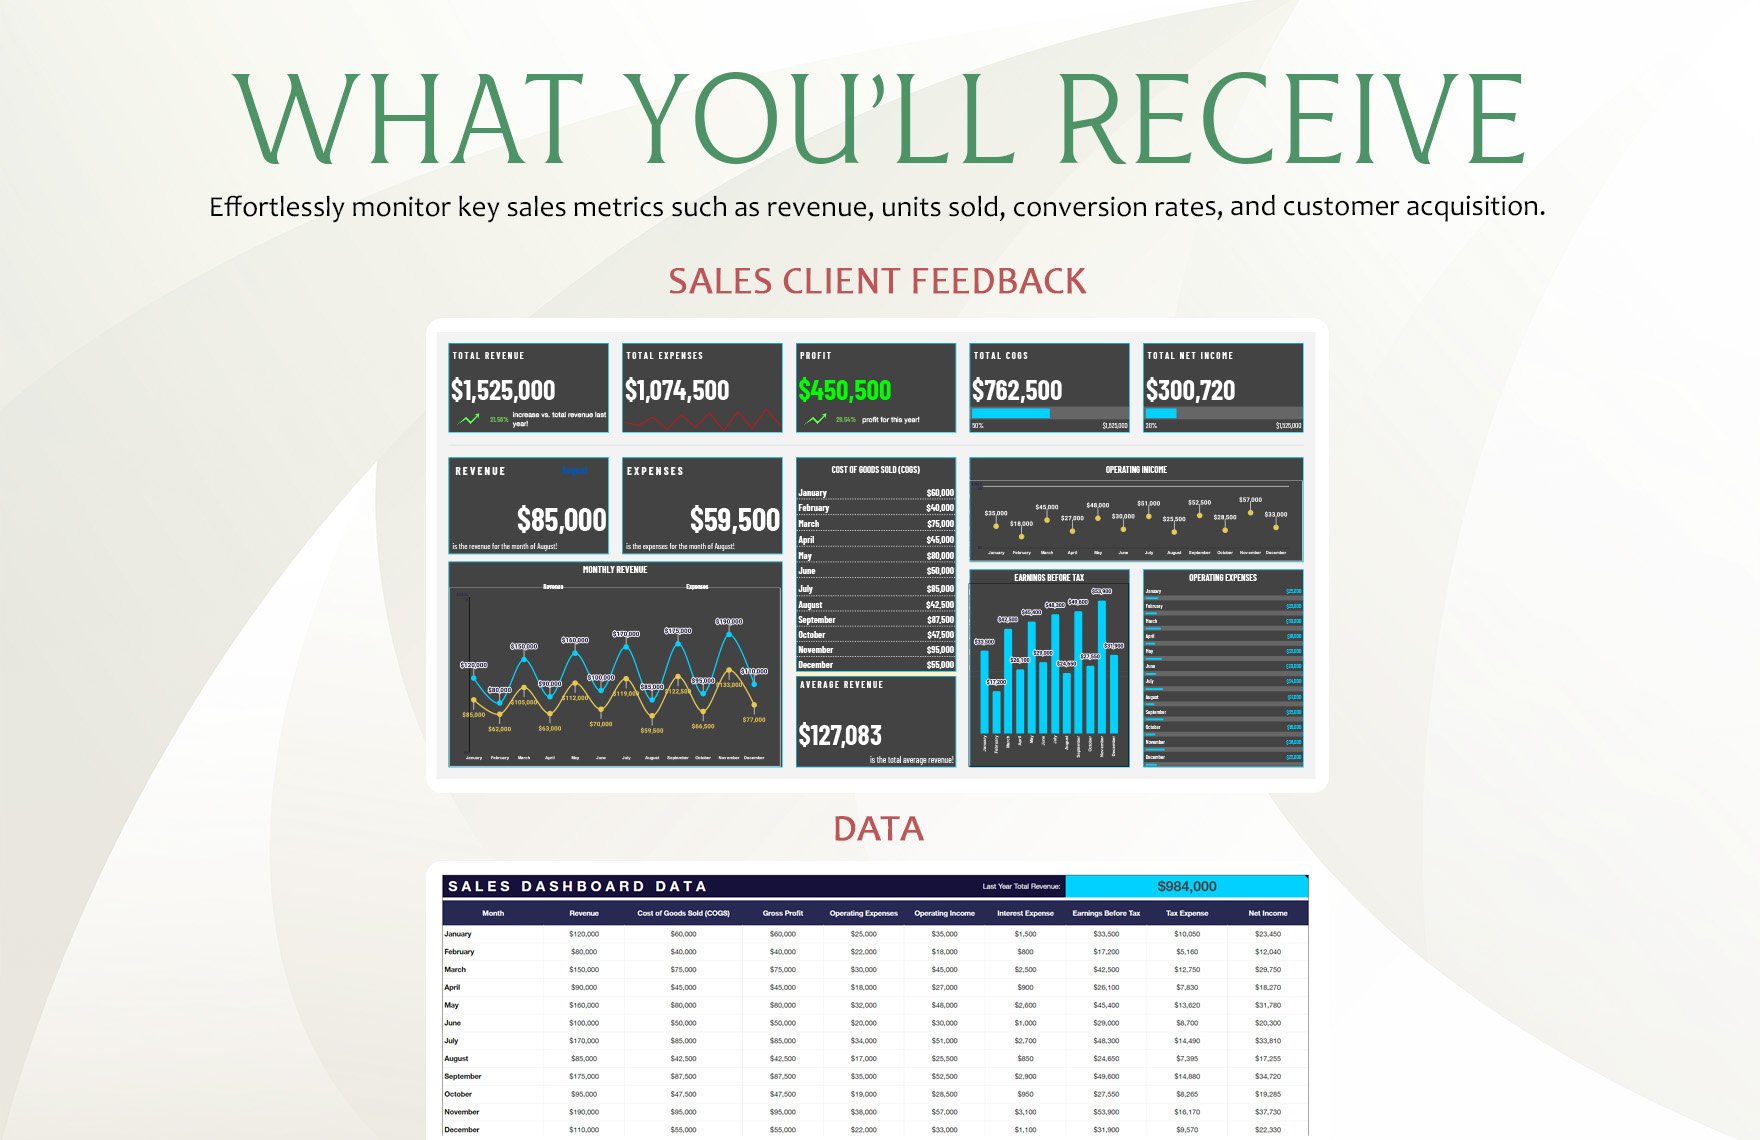 Sales Monthly Dashboard Template